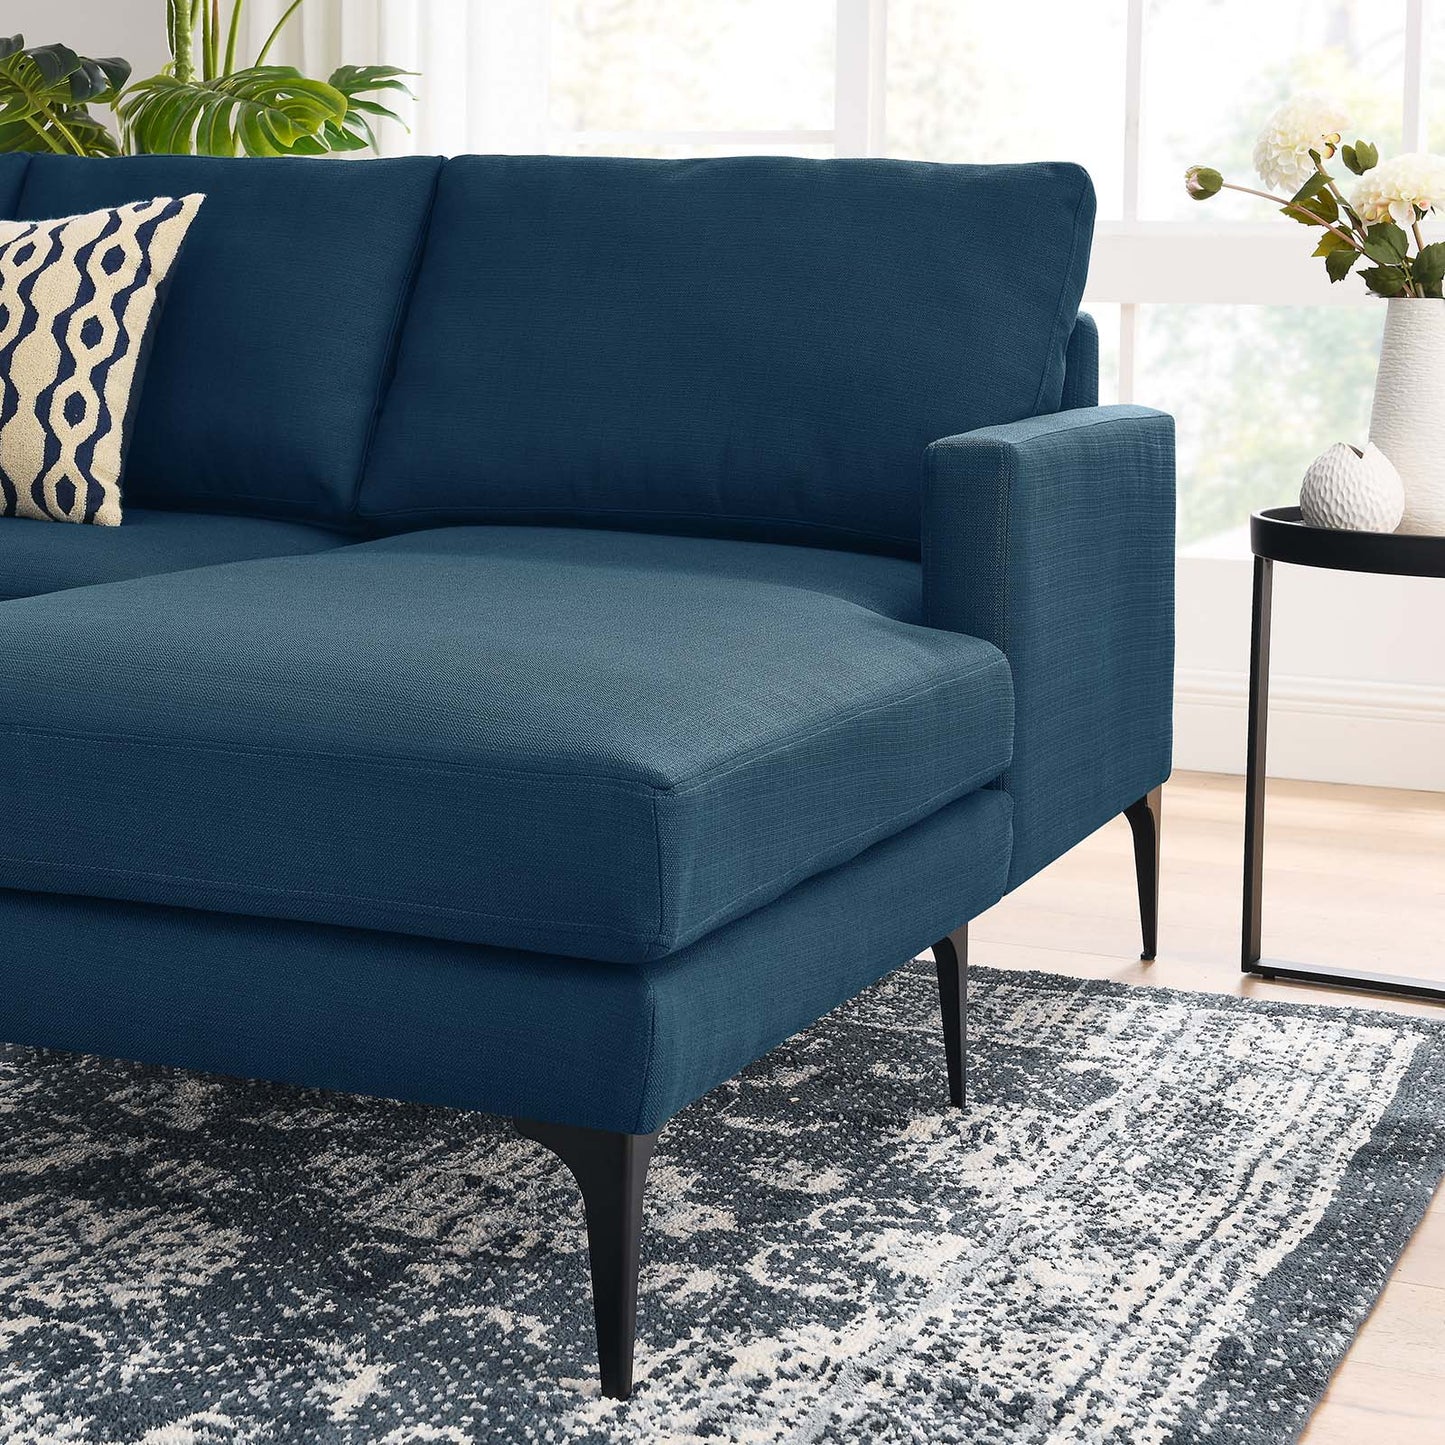 Evermore Right-Facing Upholstered Fabric Sectional Sofa Azure EEI-6012-AZU